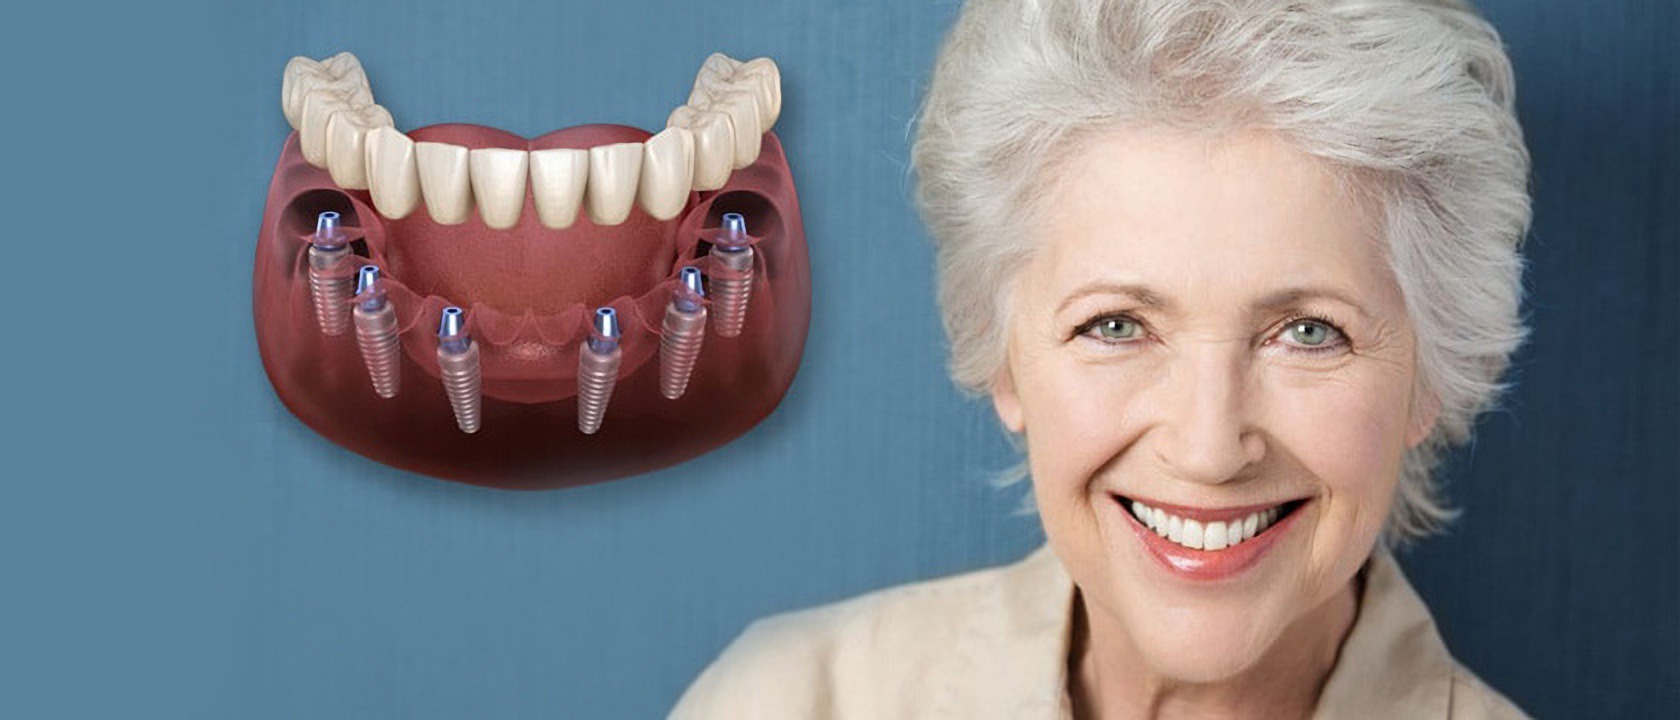 Dental implants for foreigners in Turkey